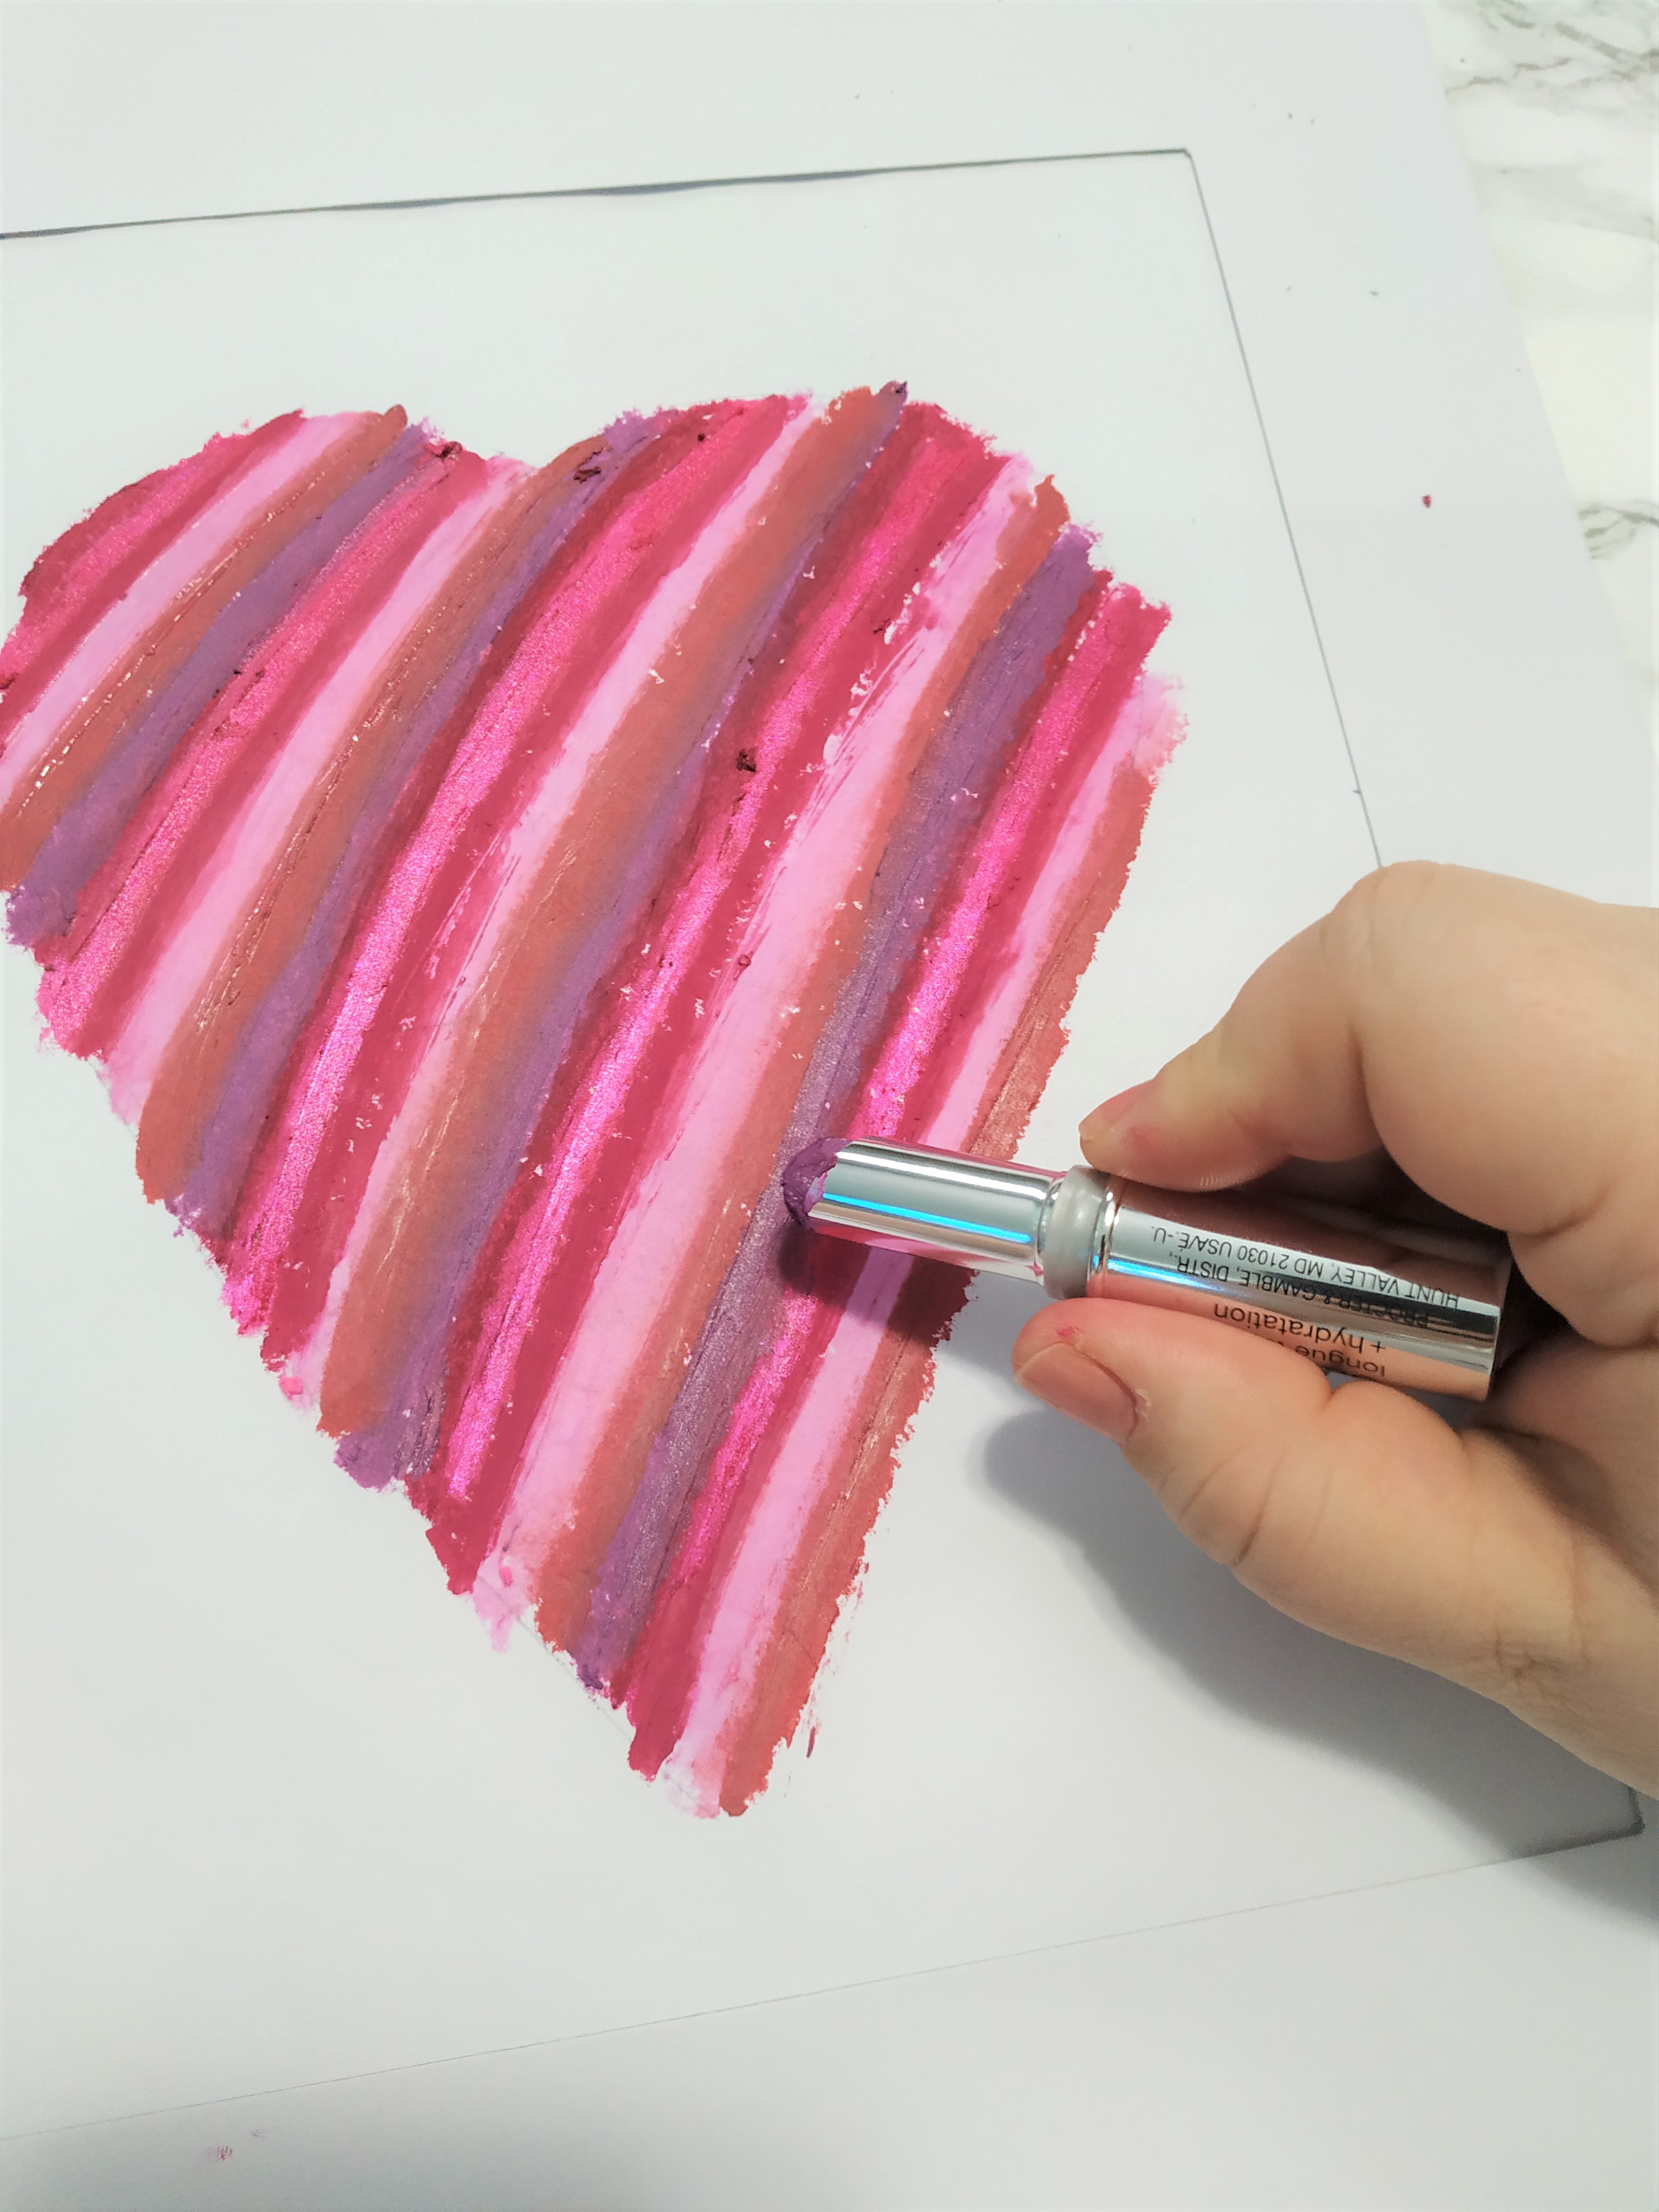 Hand holding a lipstick ready to make lines on a heart.